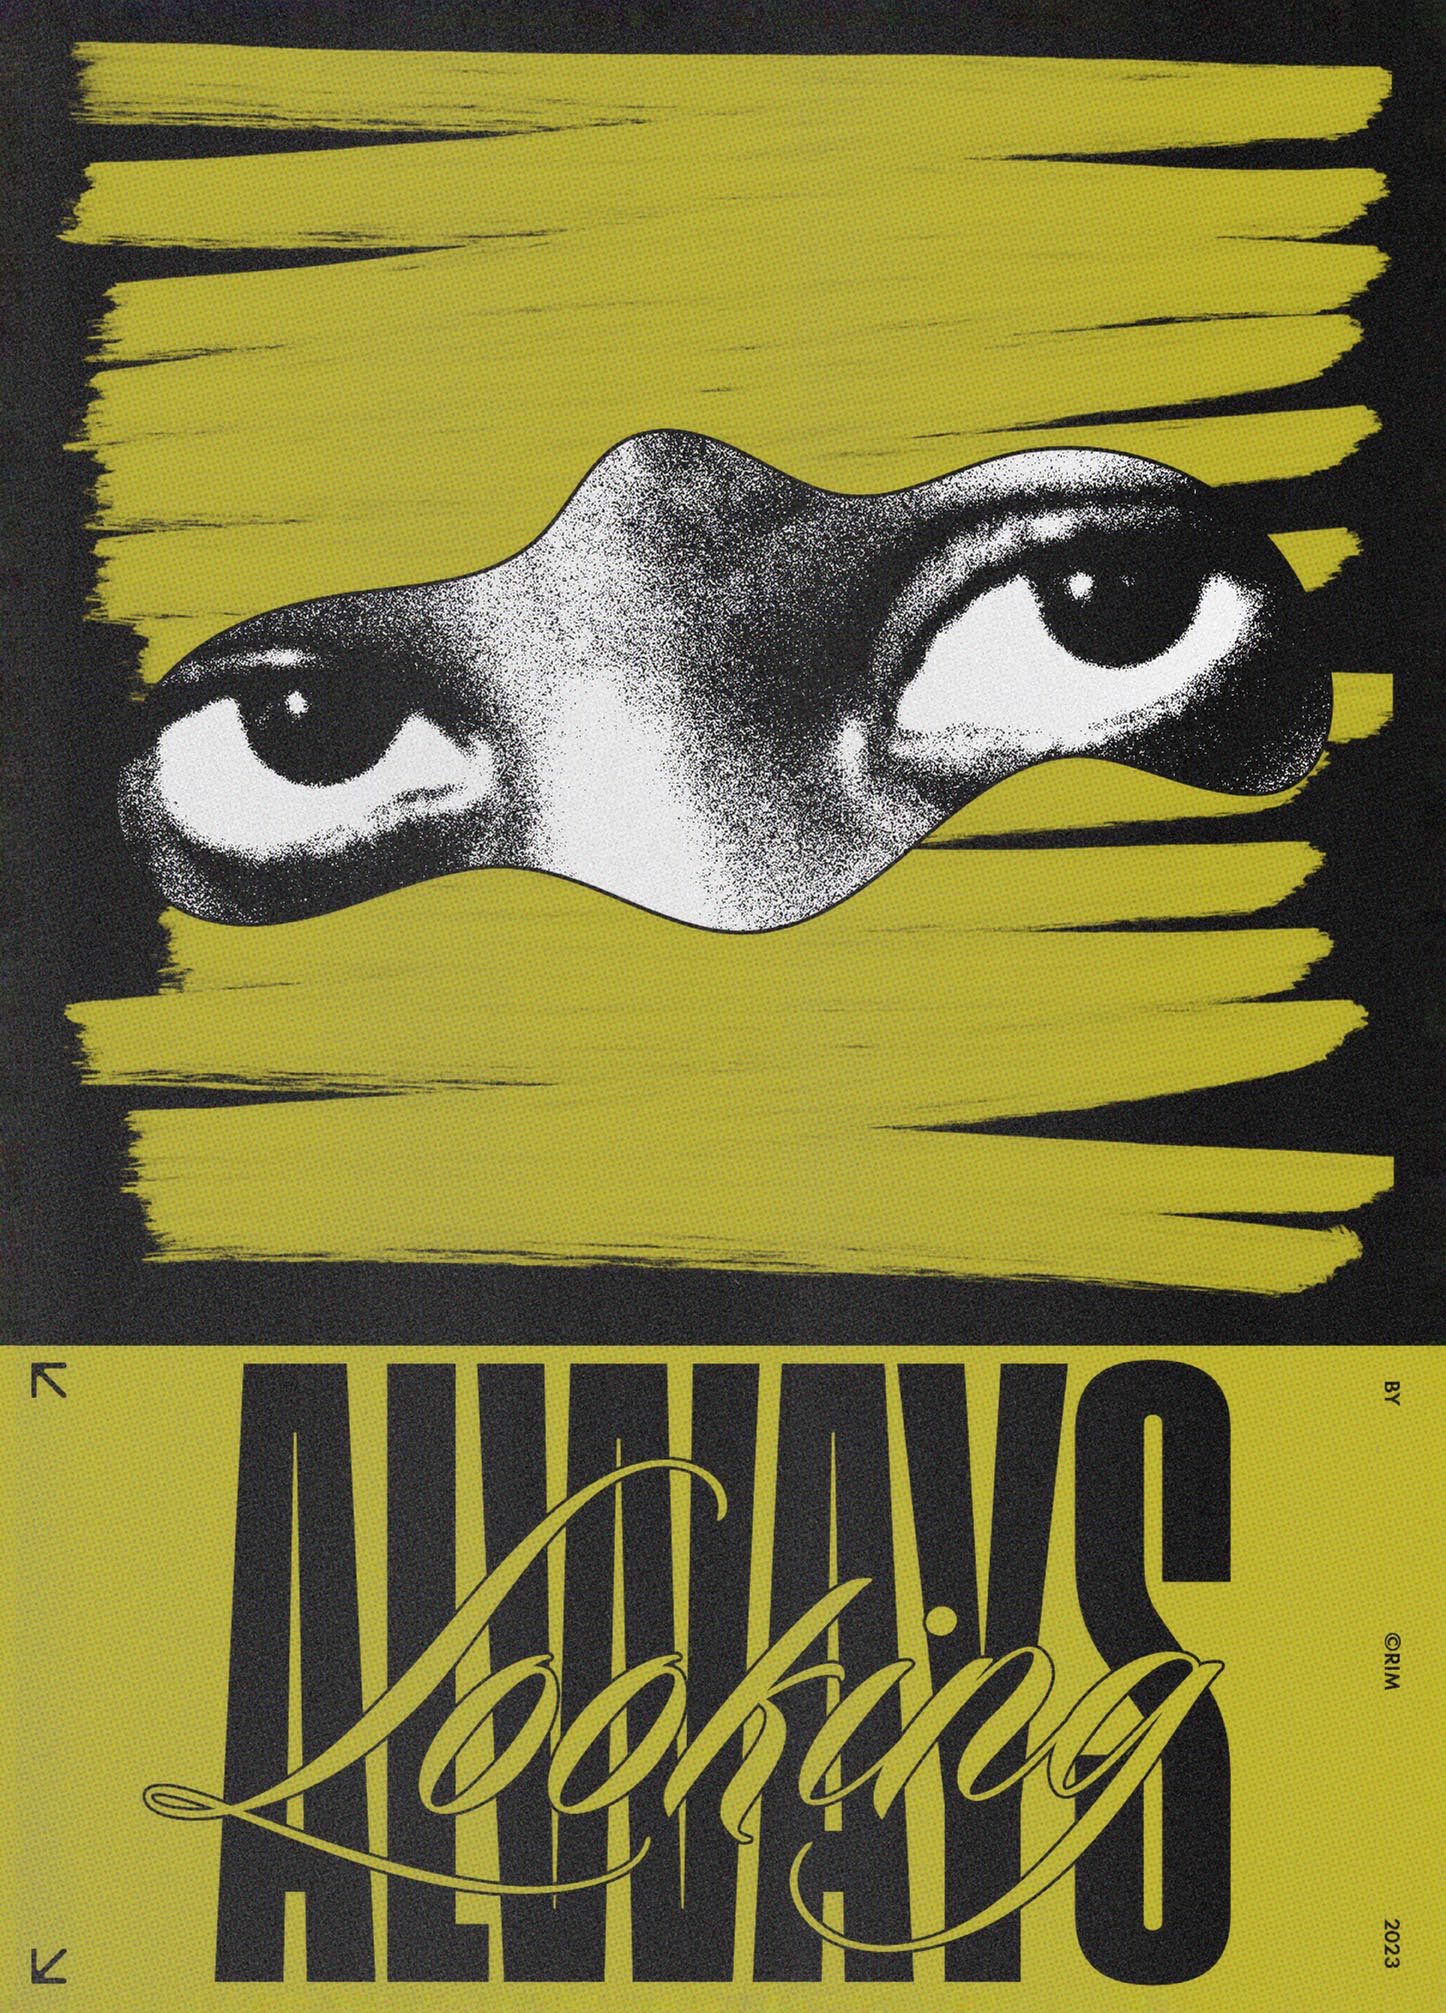 a yellow poster with a black and white image of an eye